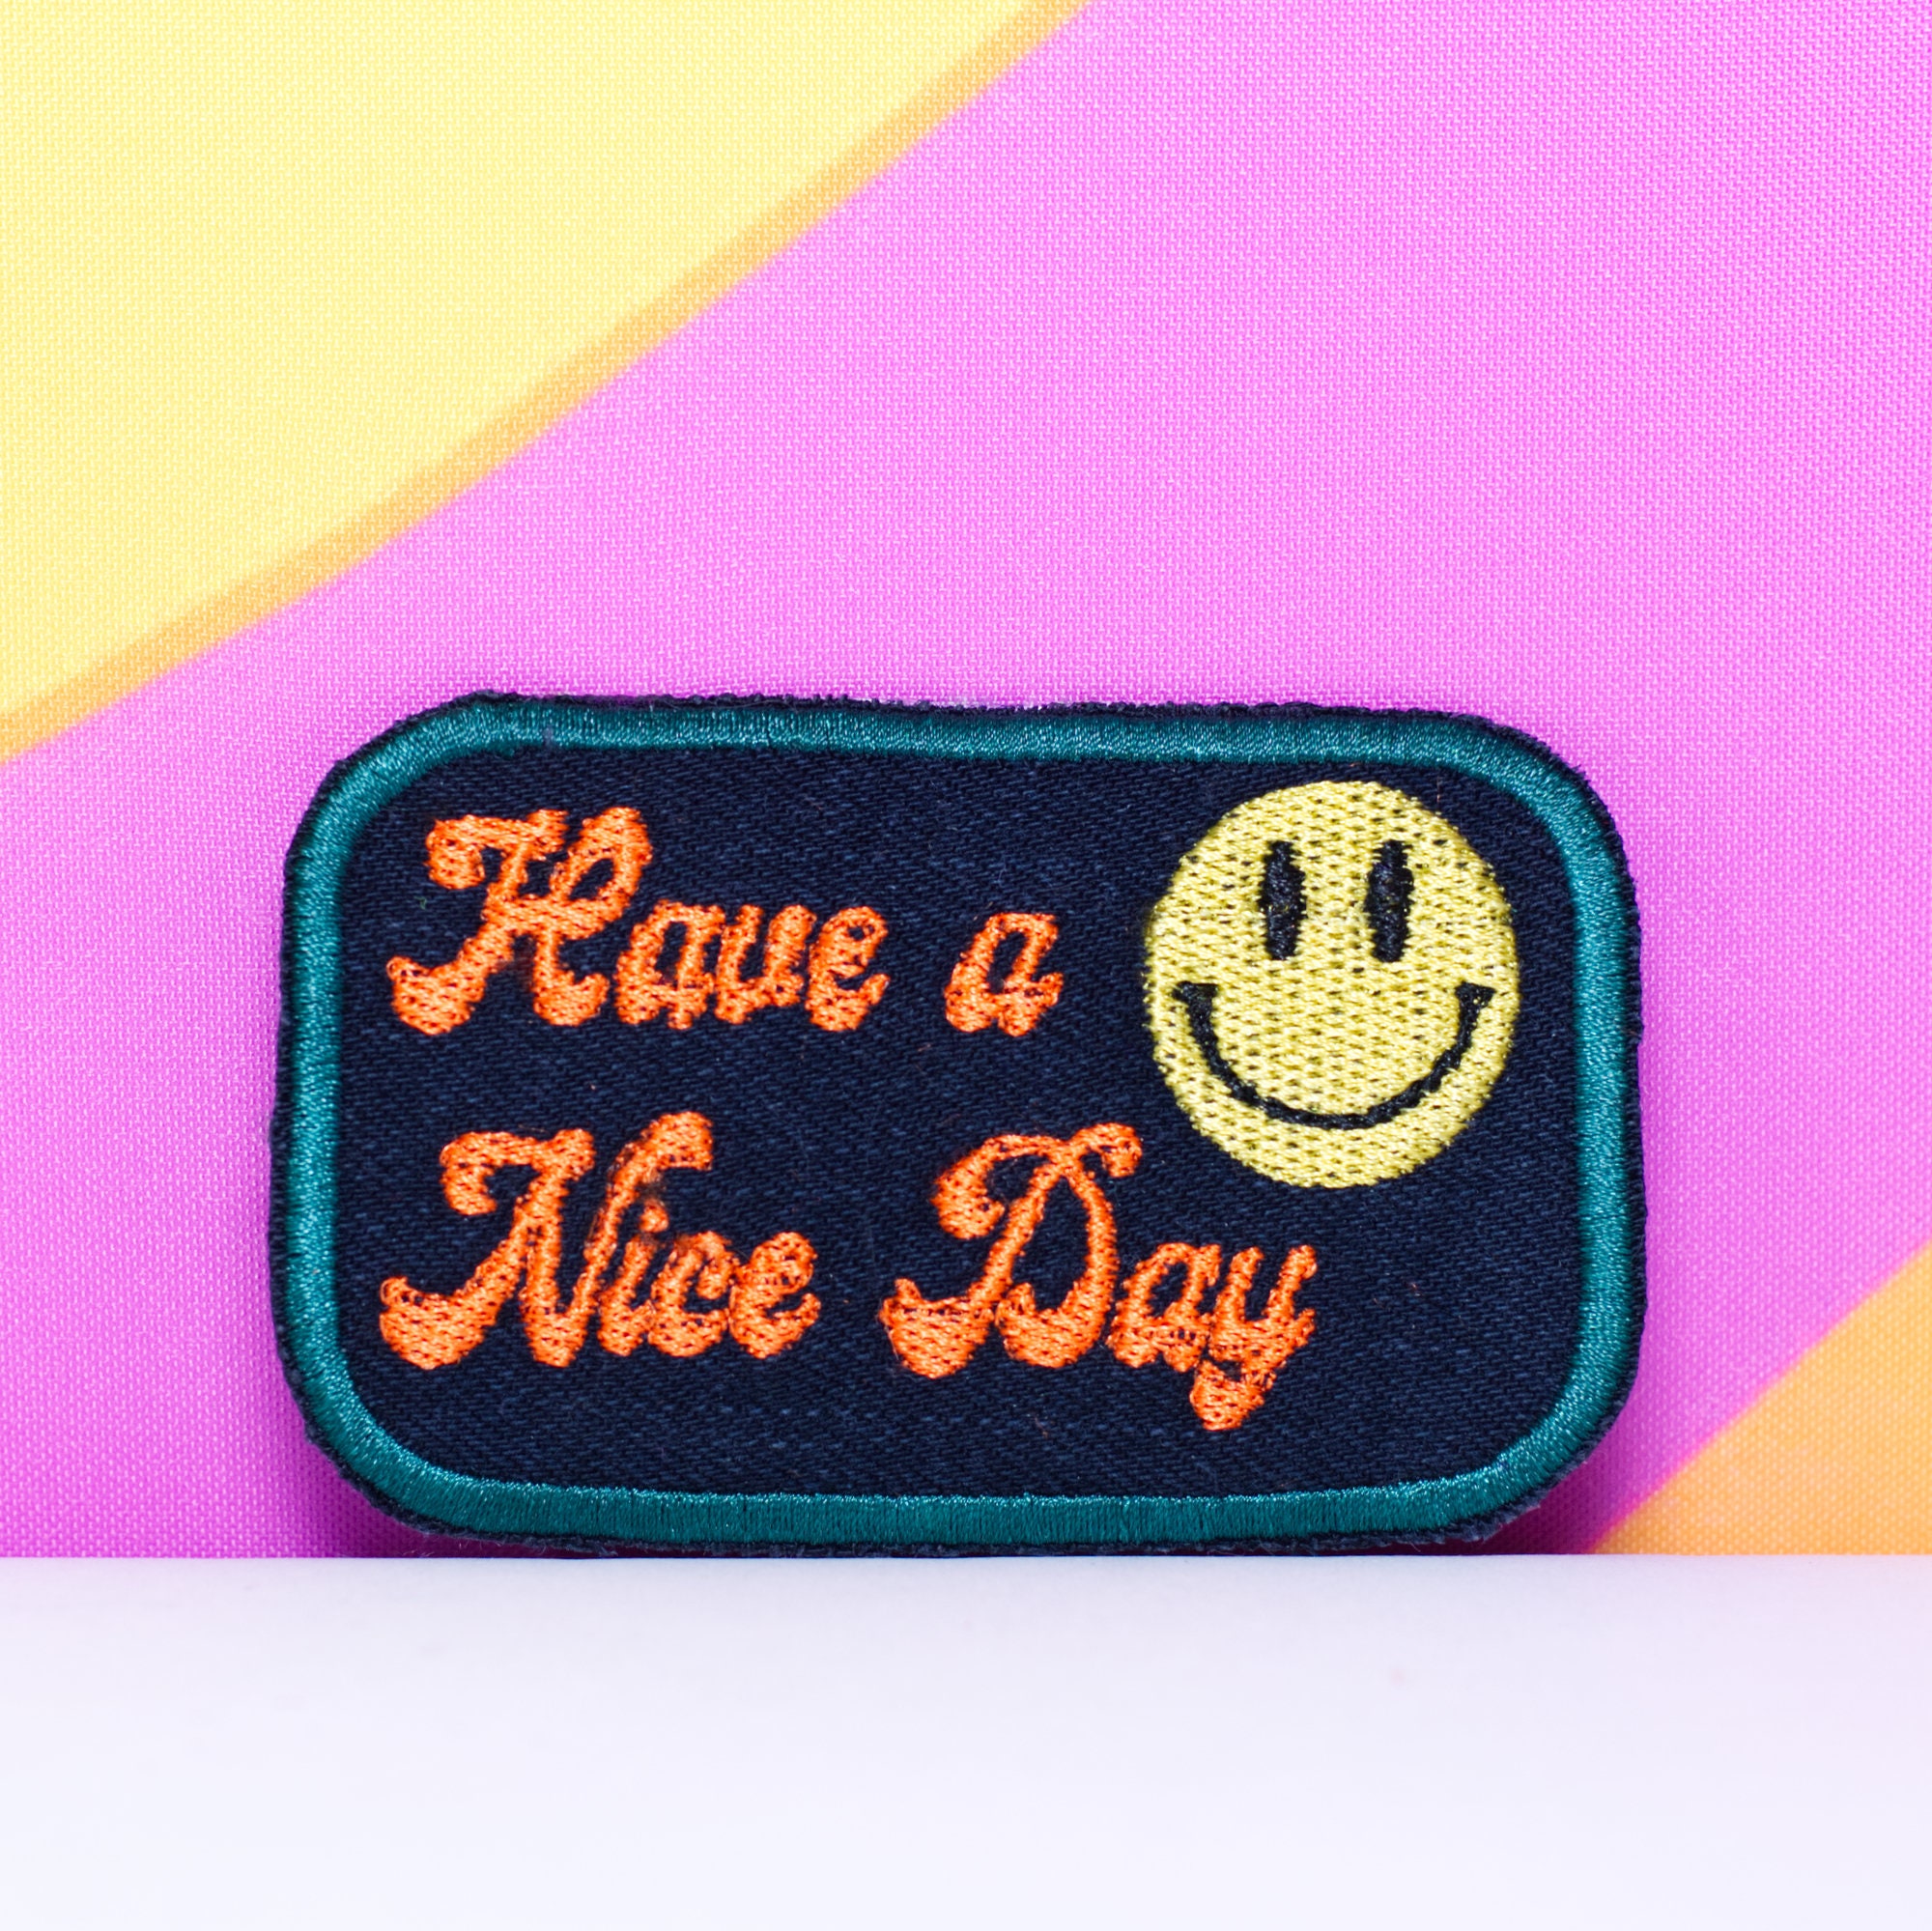 Retro Have a Nice Day 60s/70s Inspired Embroidered Patch 